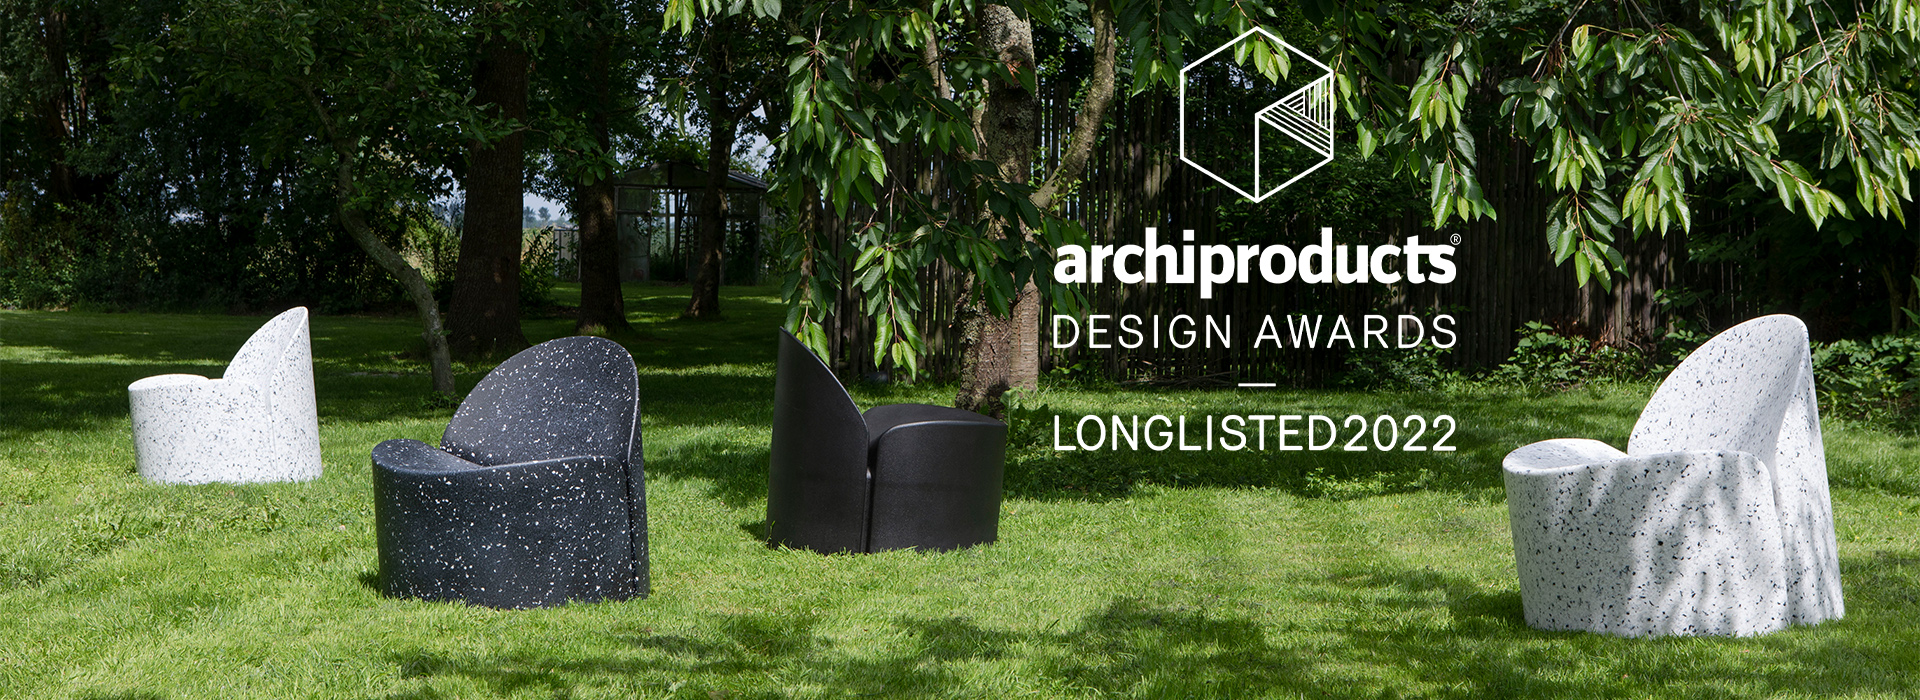 Longlisted for the Archiproducts Design Awards 2022: Bloom chair by Banne